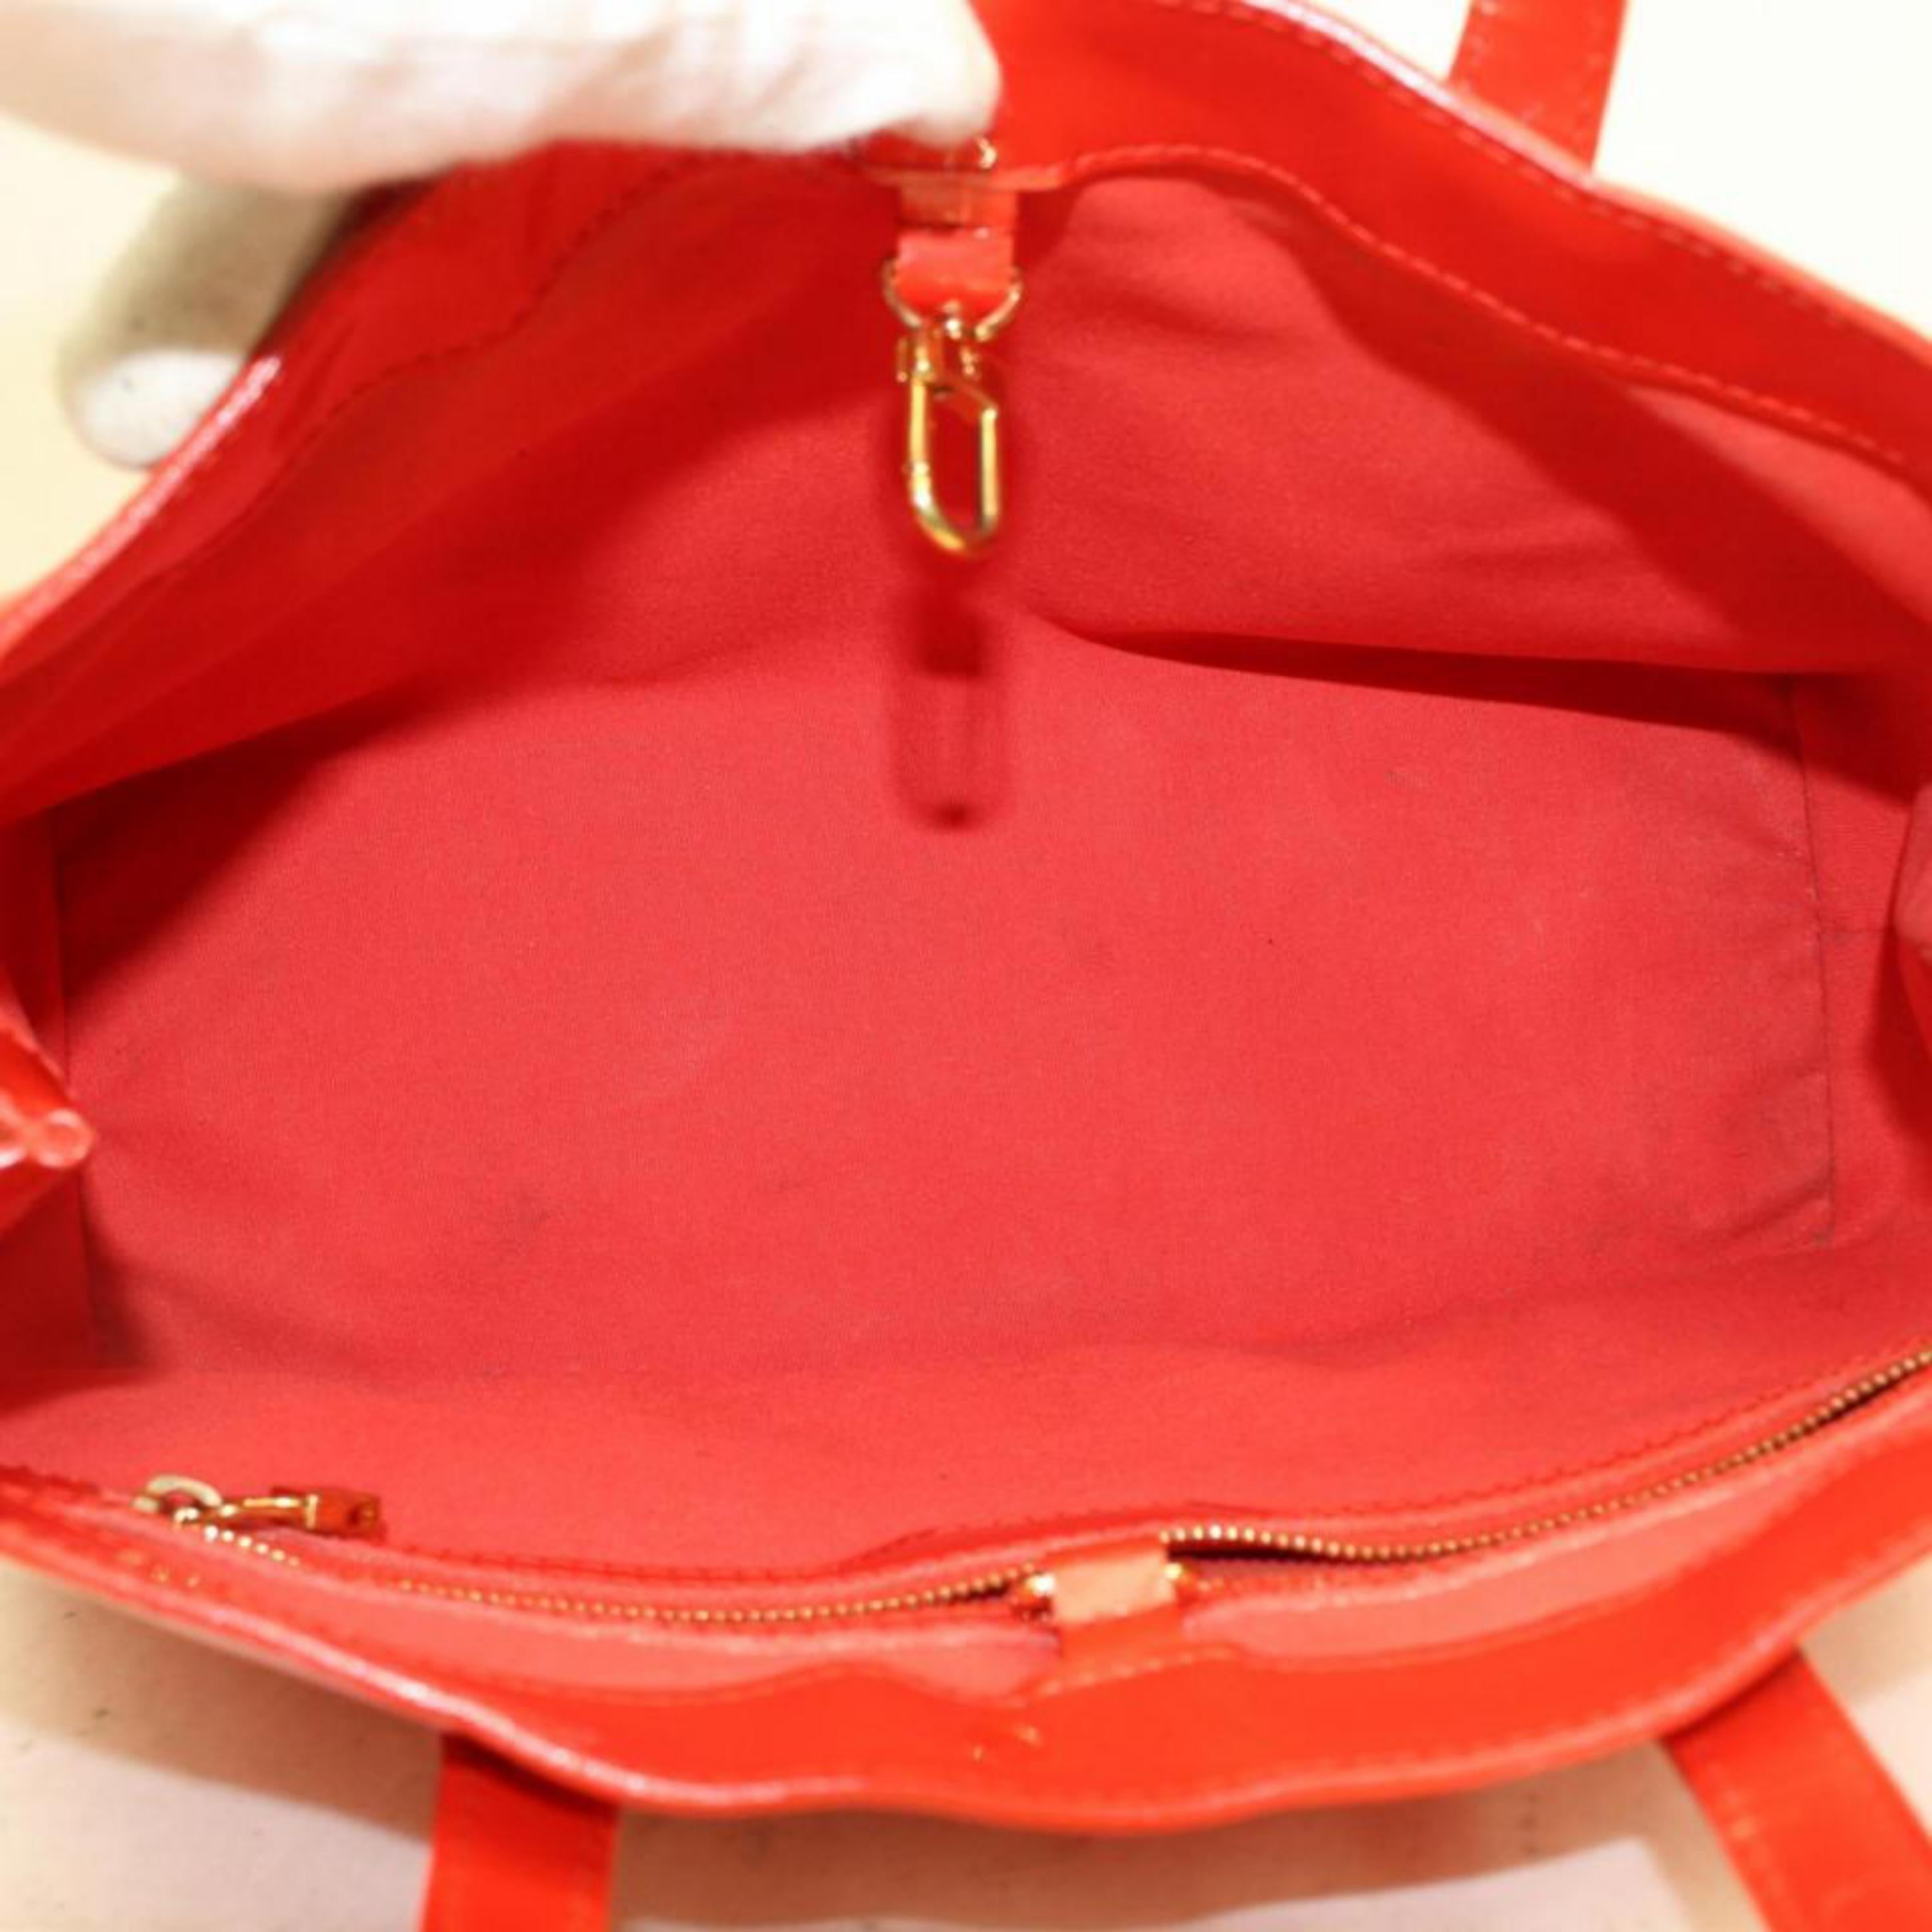 Louis Vuitton Wilshire Monogram Vernis Pm 869517 Red Patent Leather Tote For Sale 7